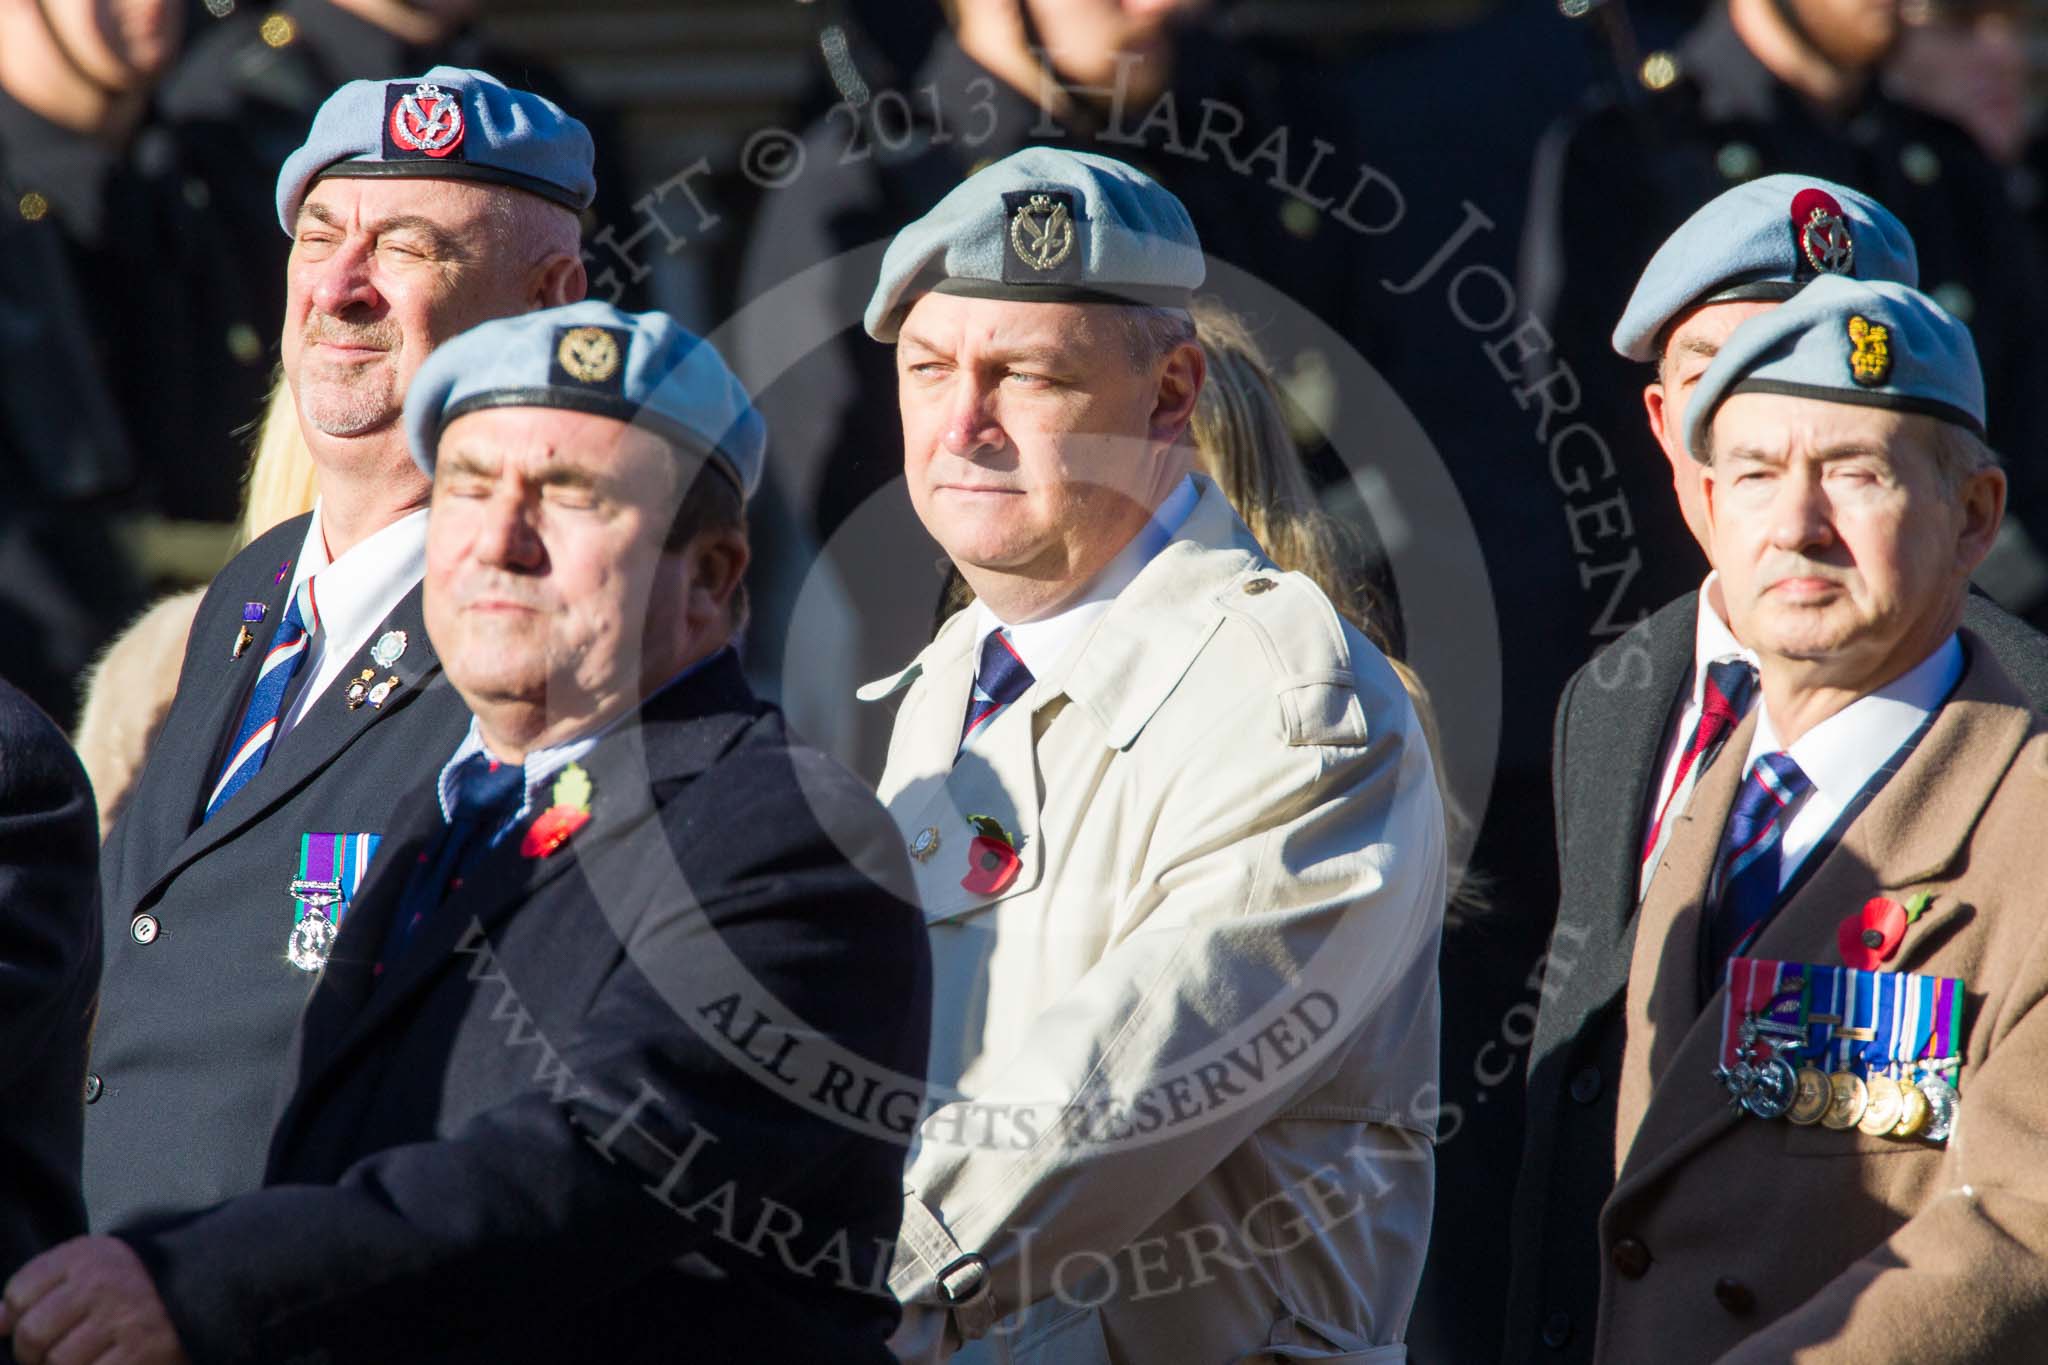 Remembrance Sunday at the Cenotaph in London 2014: Group B12 - Army Air Corps Association.
Press stand opposite the Foreign Office building, Whitehall, London SW1,
London,
Greater London,
United Kingdom,
on 09 November 2014 at 12:09, image #1636